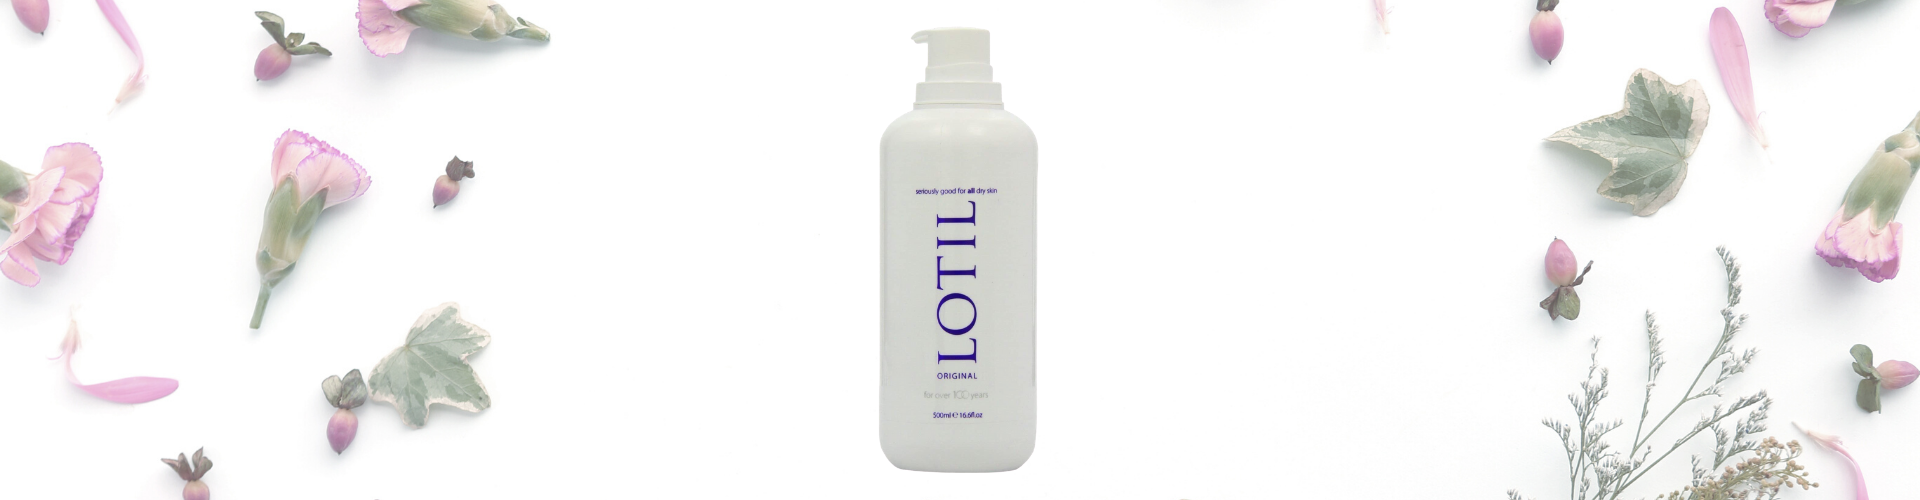 Lotil cream review middle aged skincare